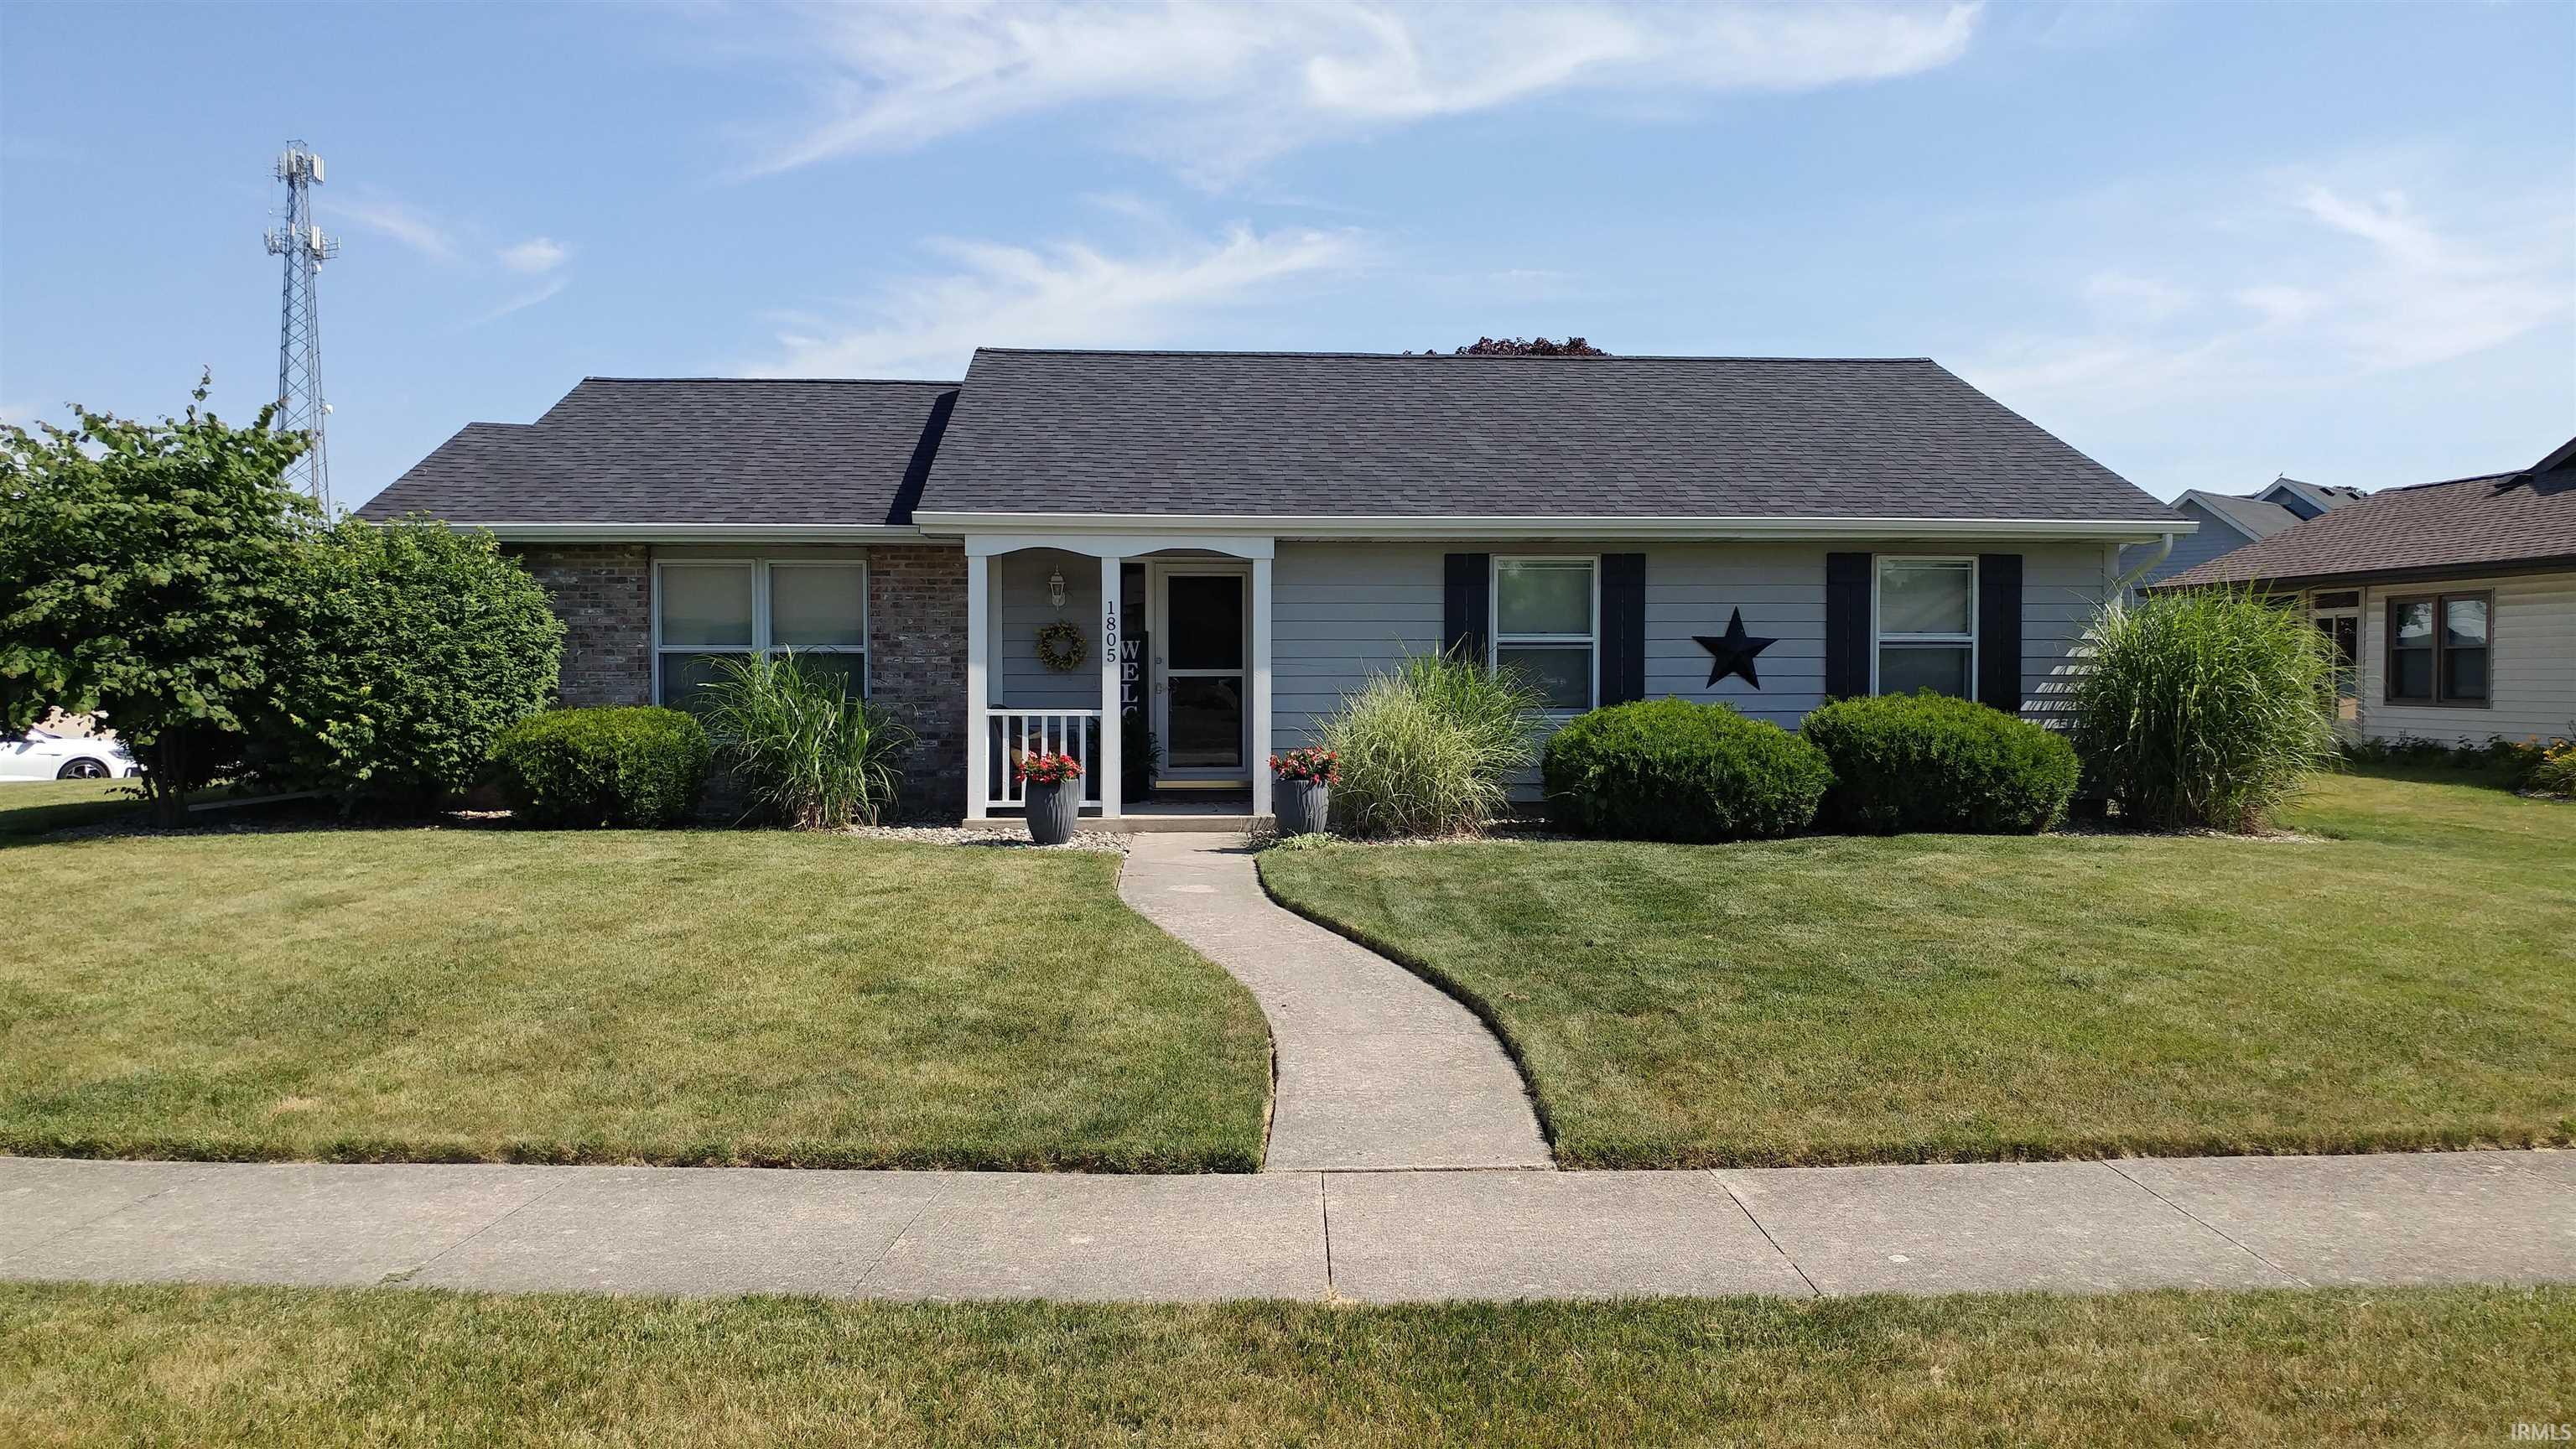 1805 Manito, Huntington, Indiana 46750, 3 Bedrooms Bedrooms, 6 Rooms Rooms,2 BathroomsBathrooms,Residential,For Sale,Manito,202225505